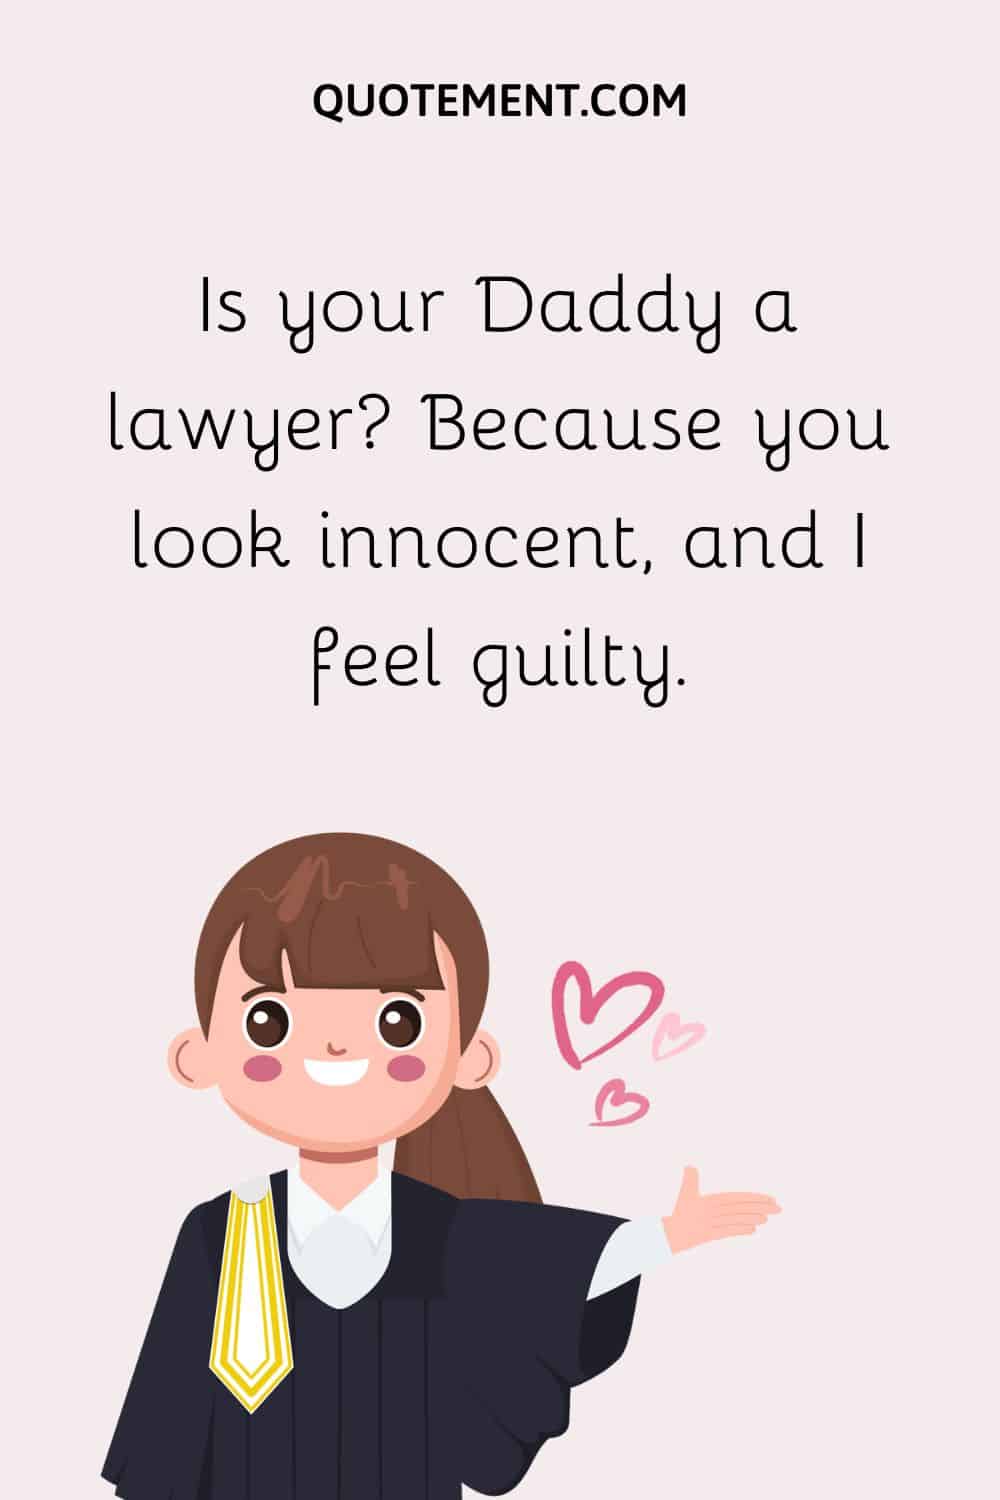 Is your Daddy a lawyer Because you look innocent, and I feel guilty